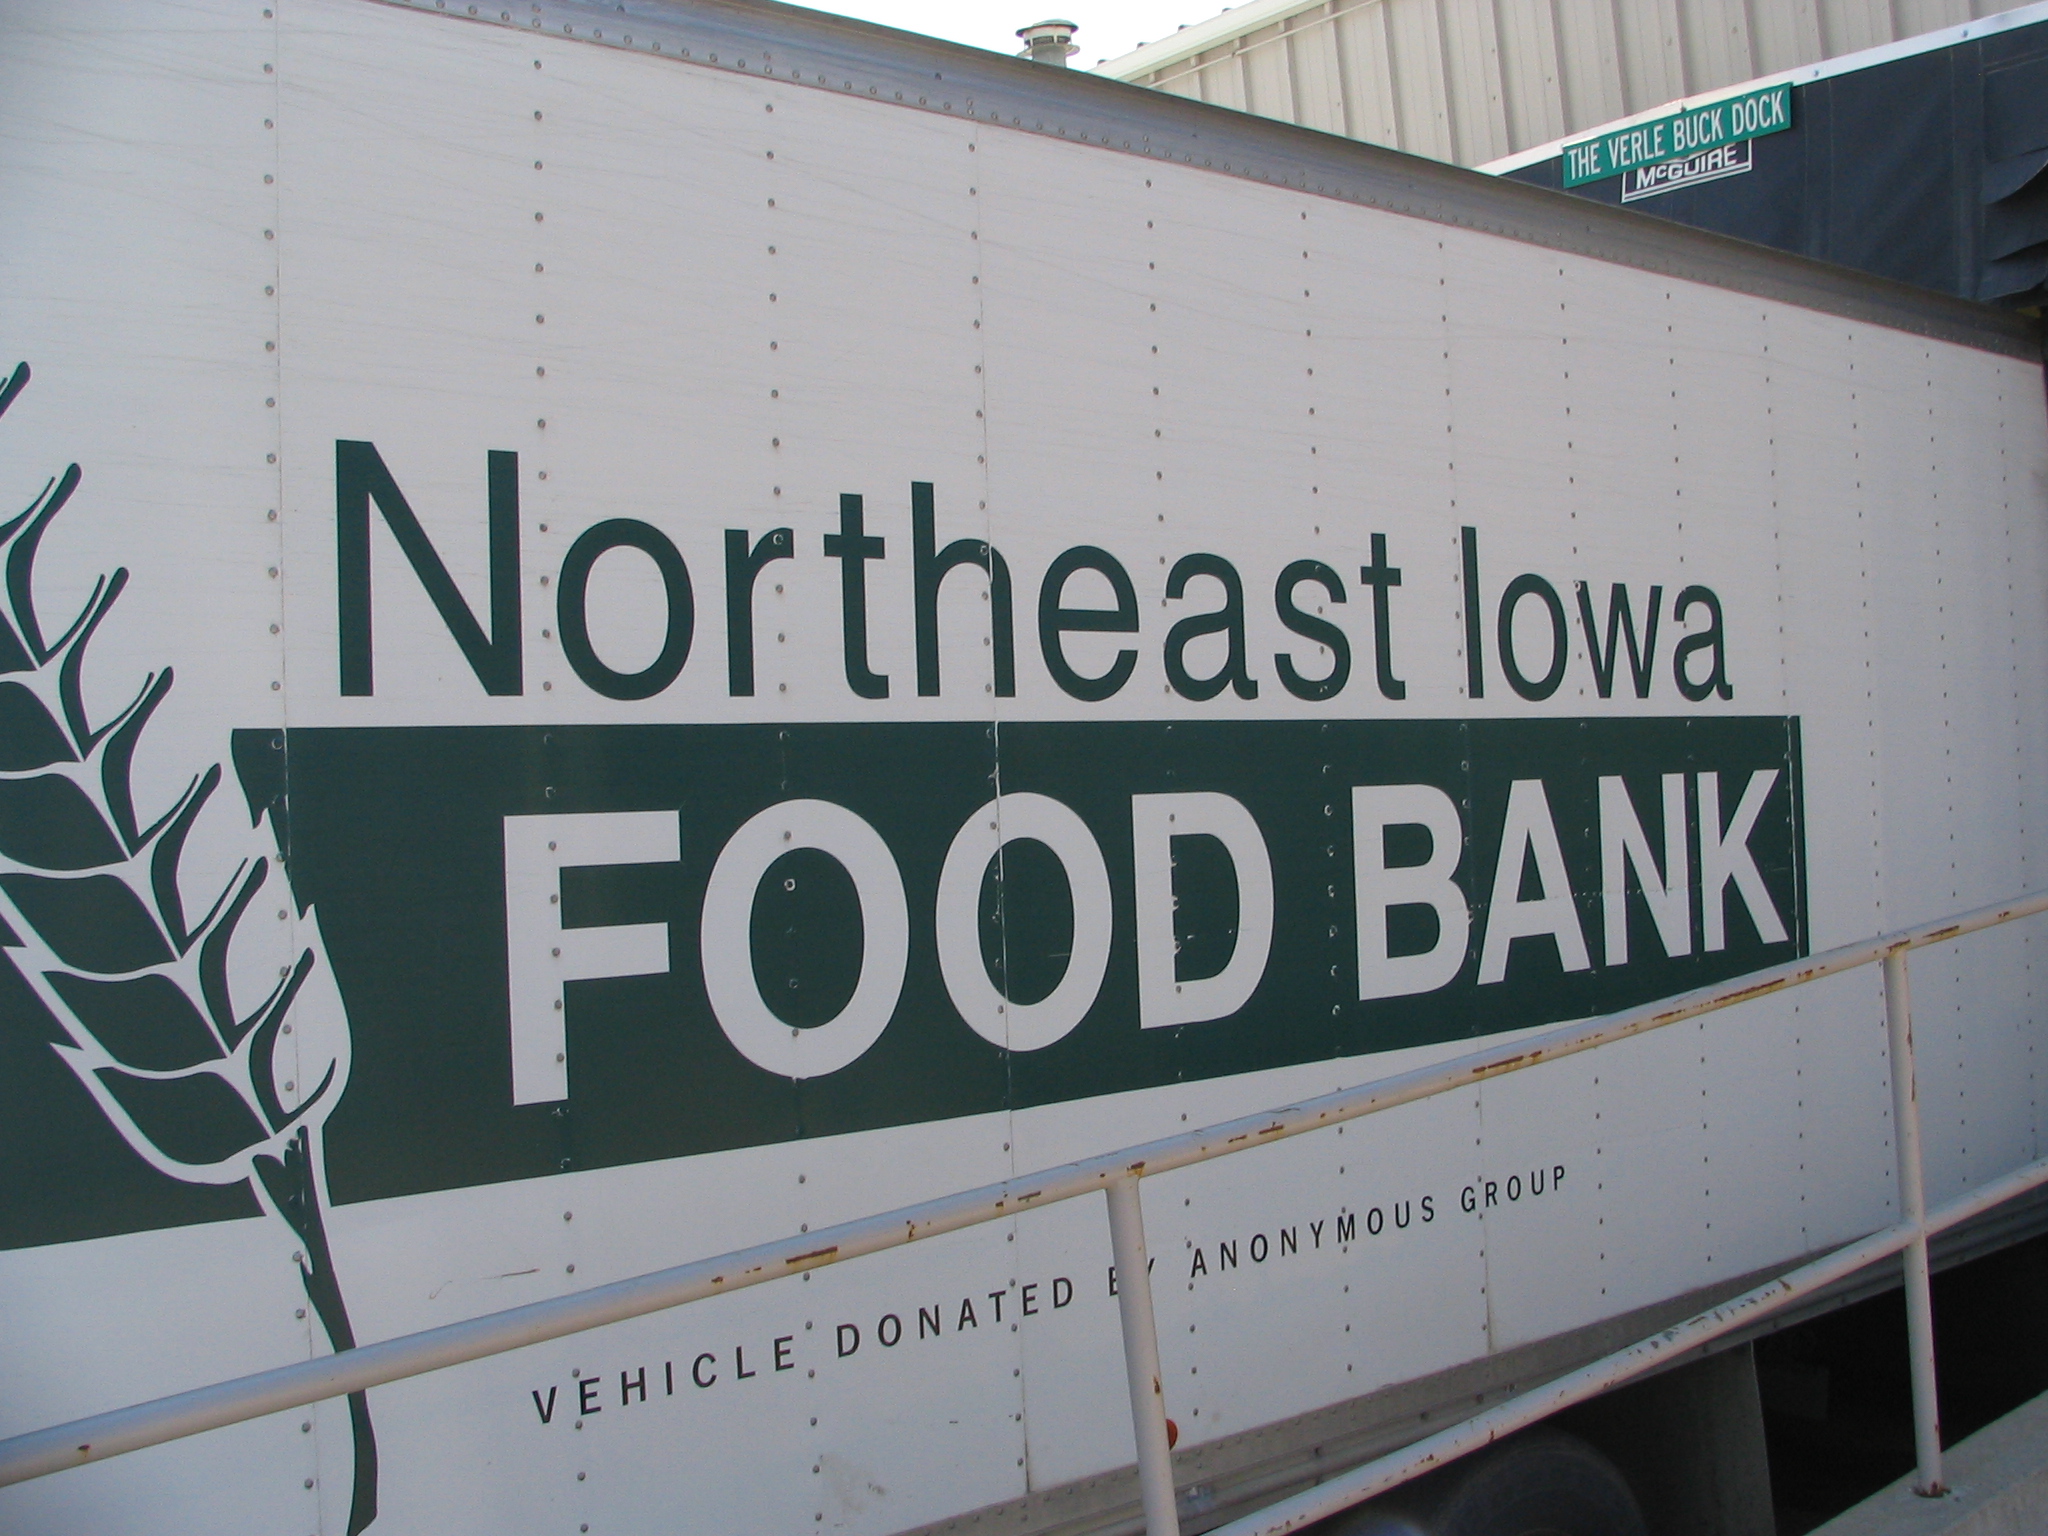 Northeast Iowa Food Bank Support From First United Methodist